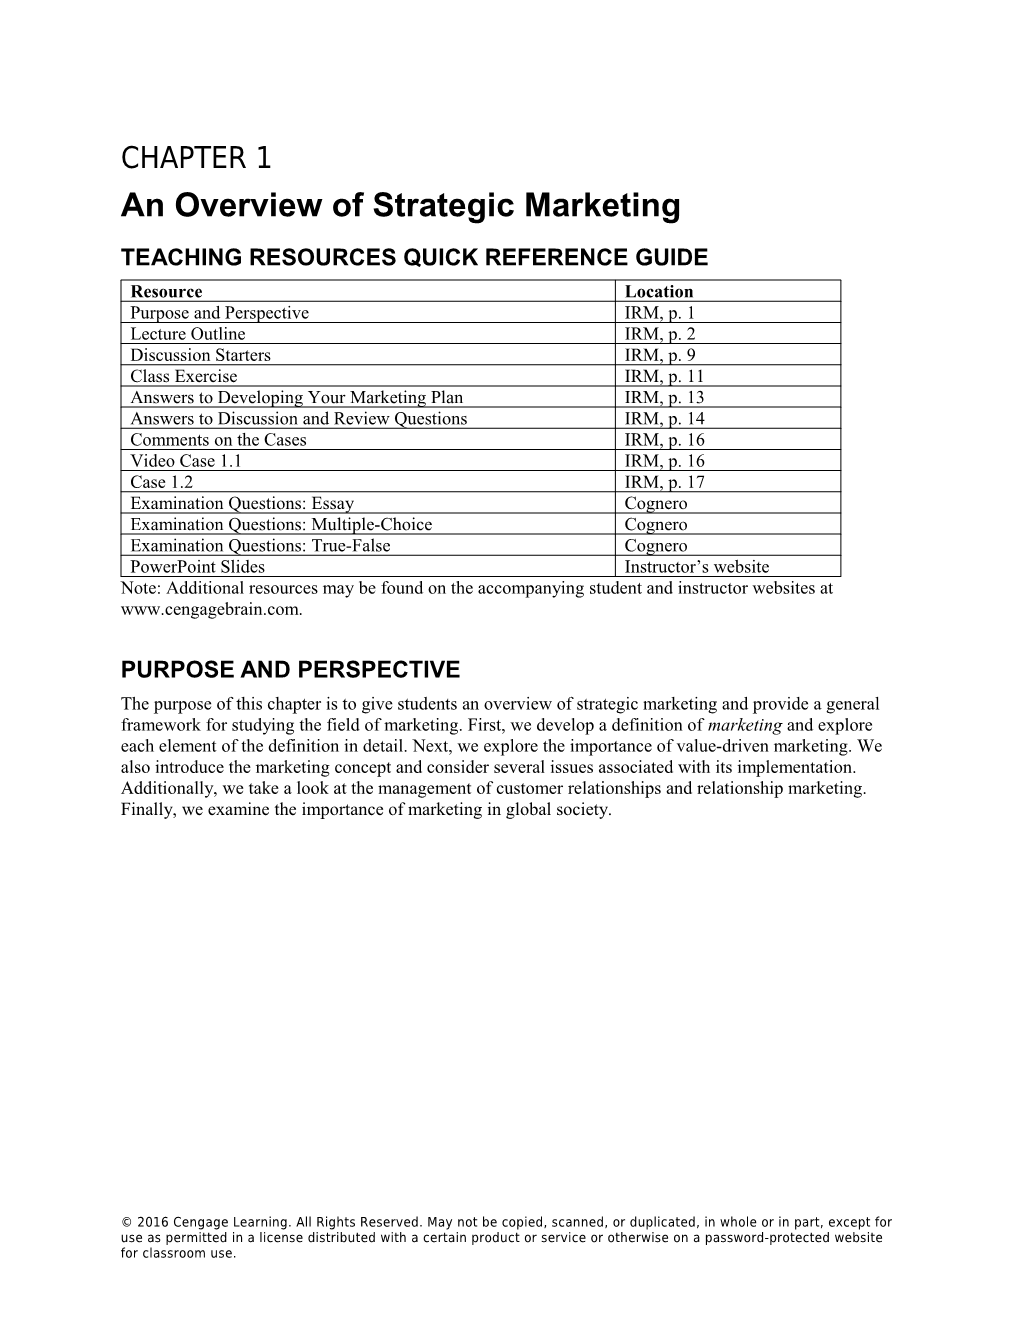 Chapter 1: an Overview of Strategic Marketing 1